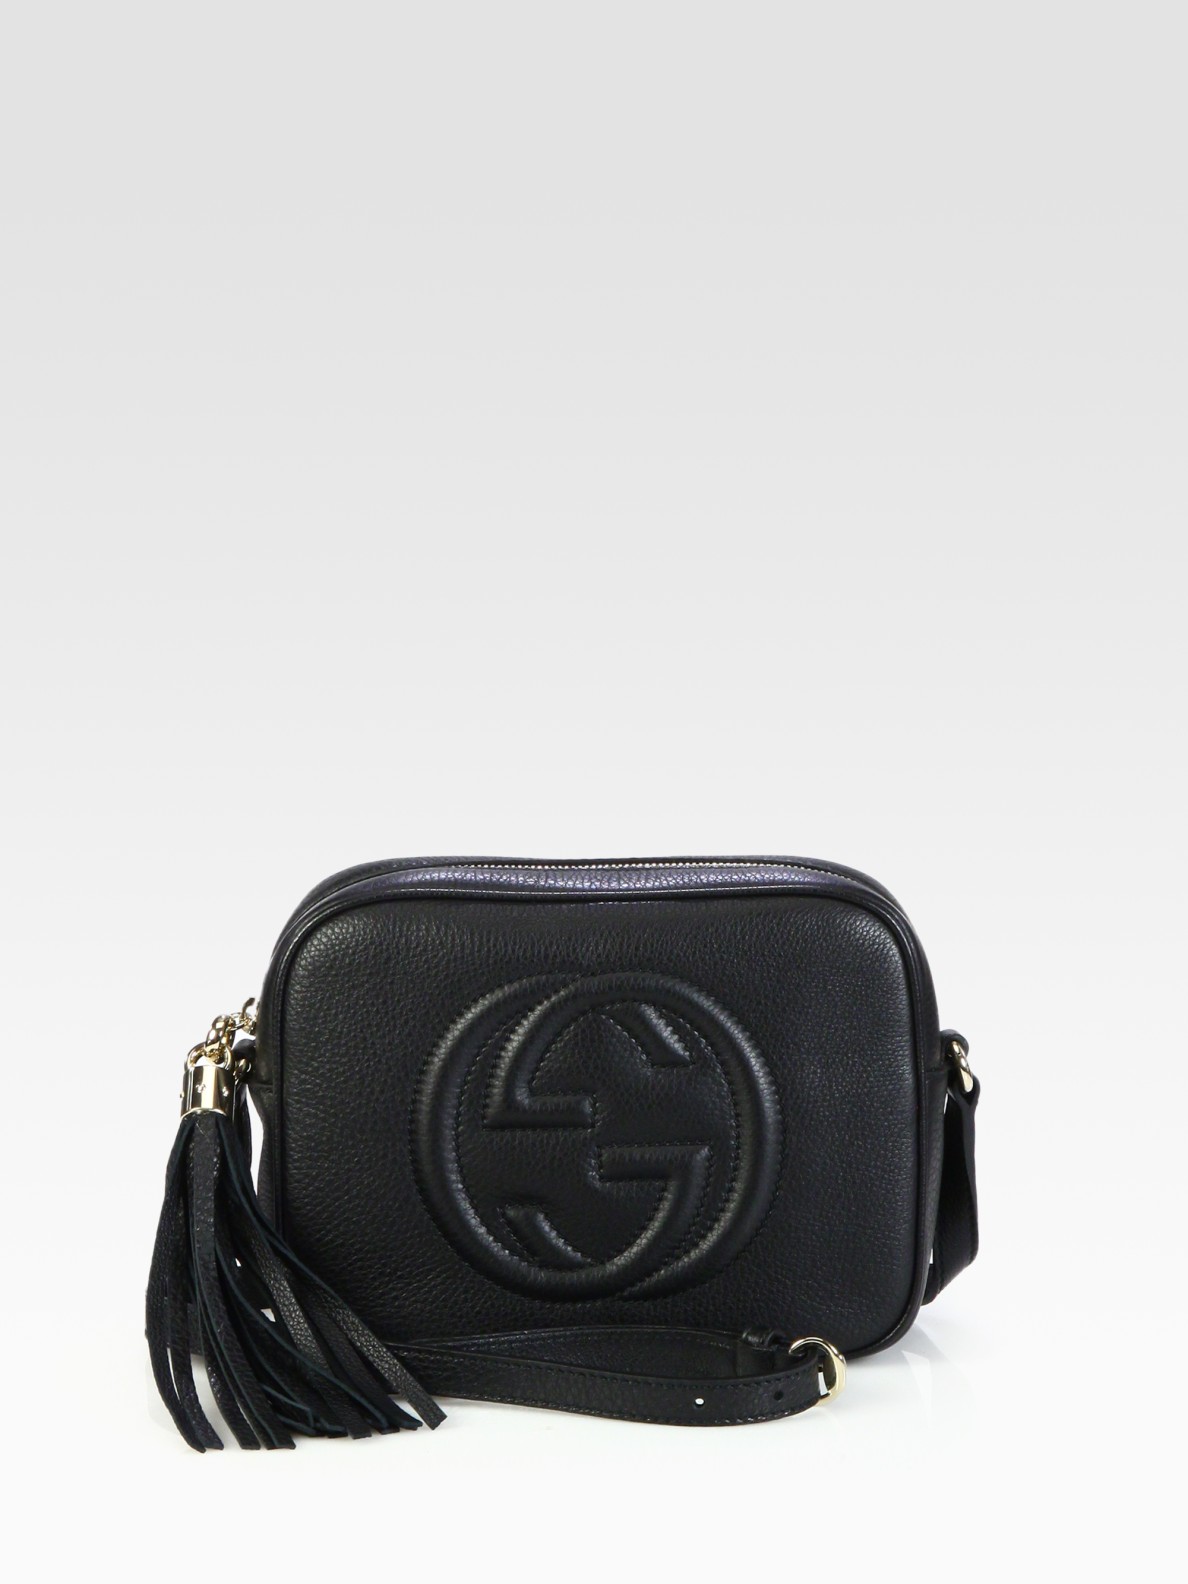 Lyst - Gucci Soho Leather Disco Bag in Black